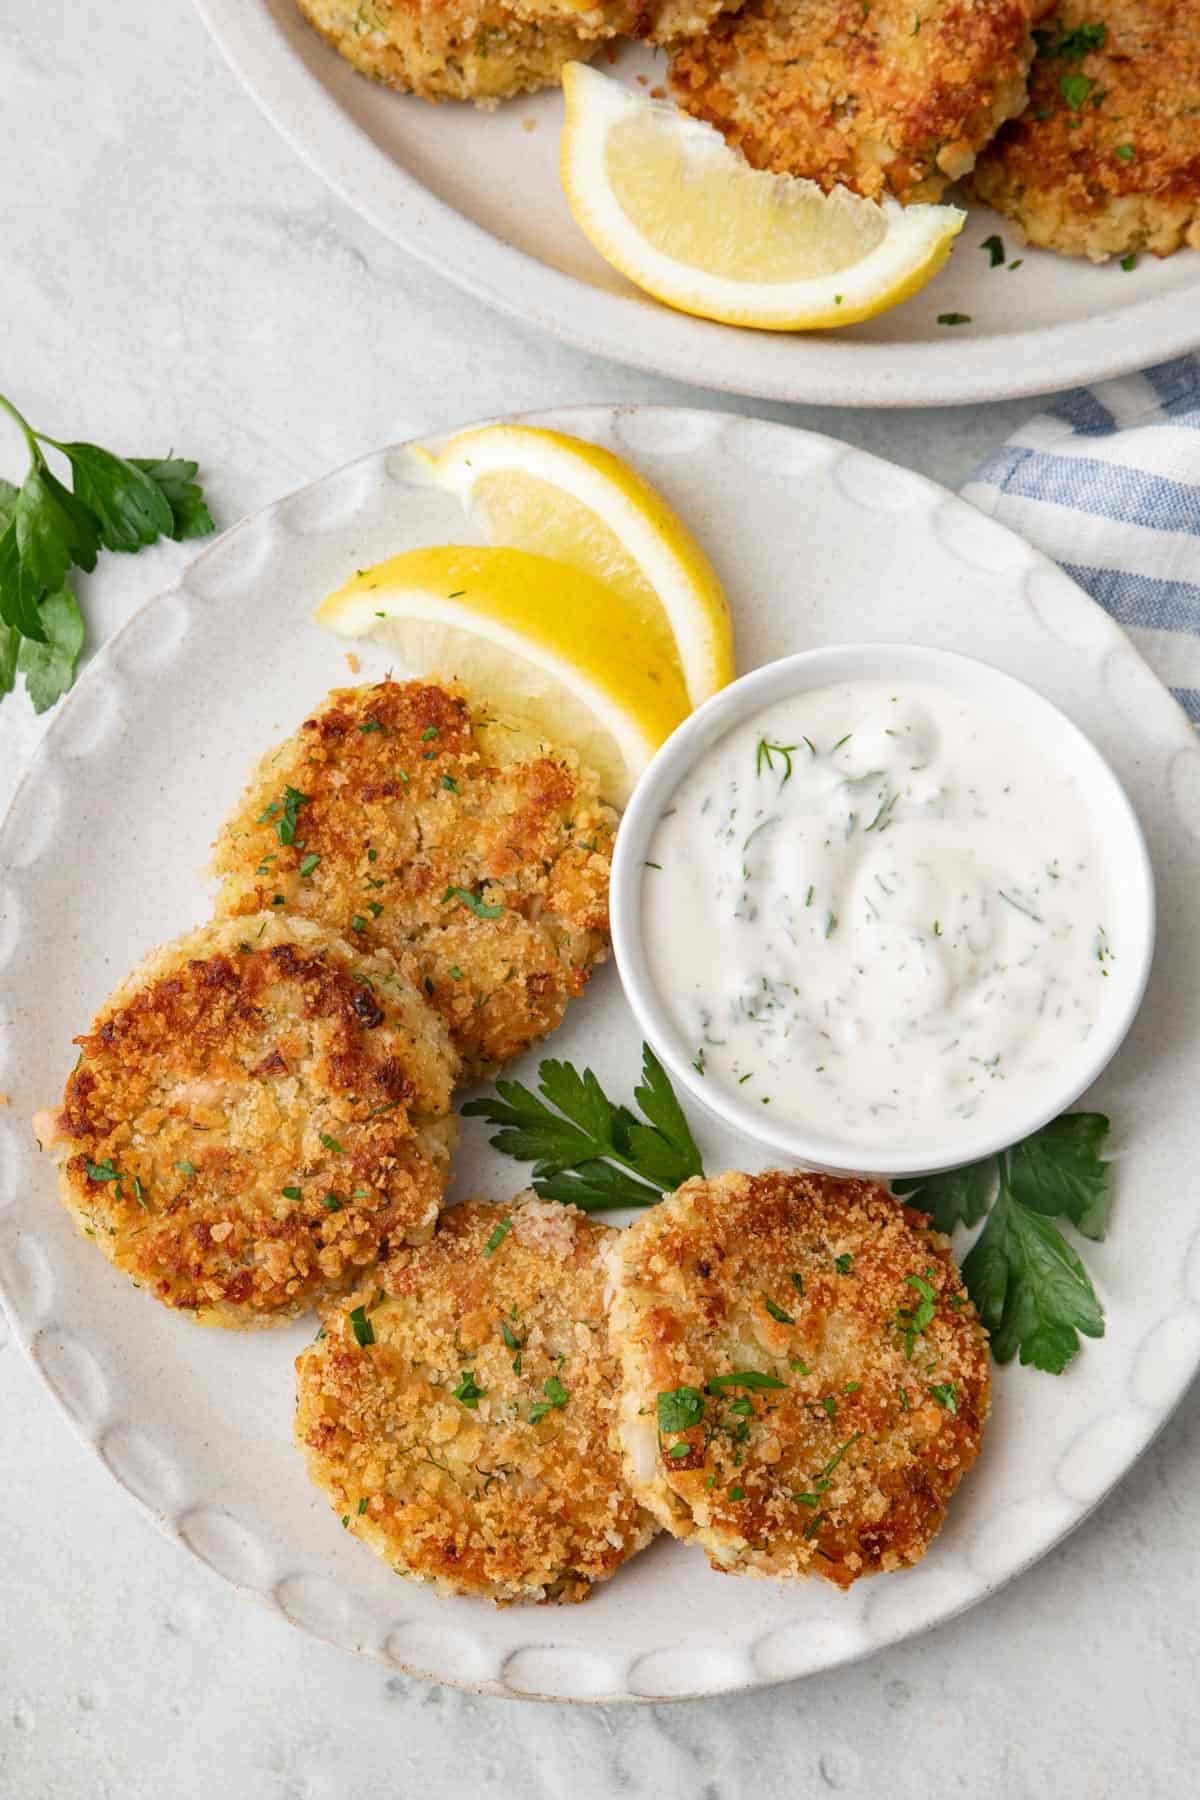 A few tuna potato cakes on a small plate with tzatziki sauce and lemon wedges.